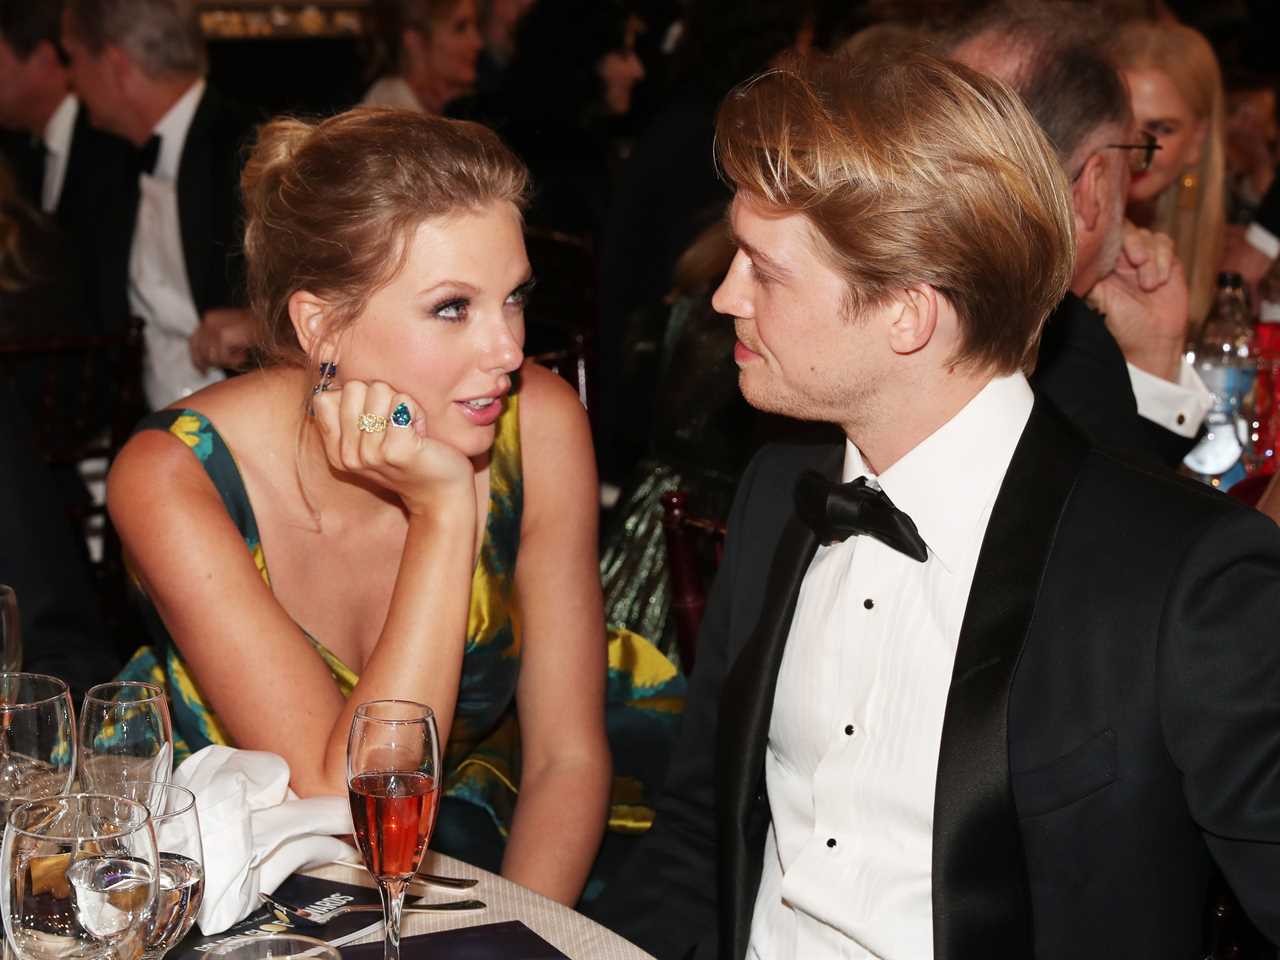 Taylor Swift and Joe Alwyn broke up after 6 years of dating. Here's a complete timeline of their relationship.